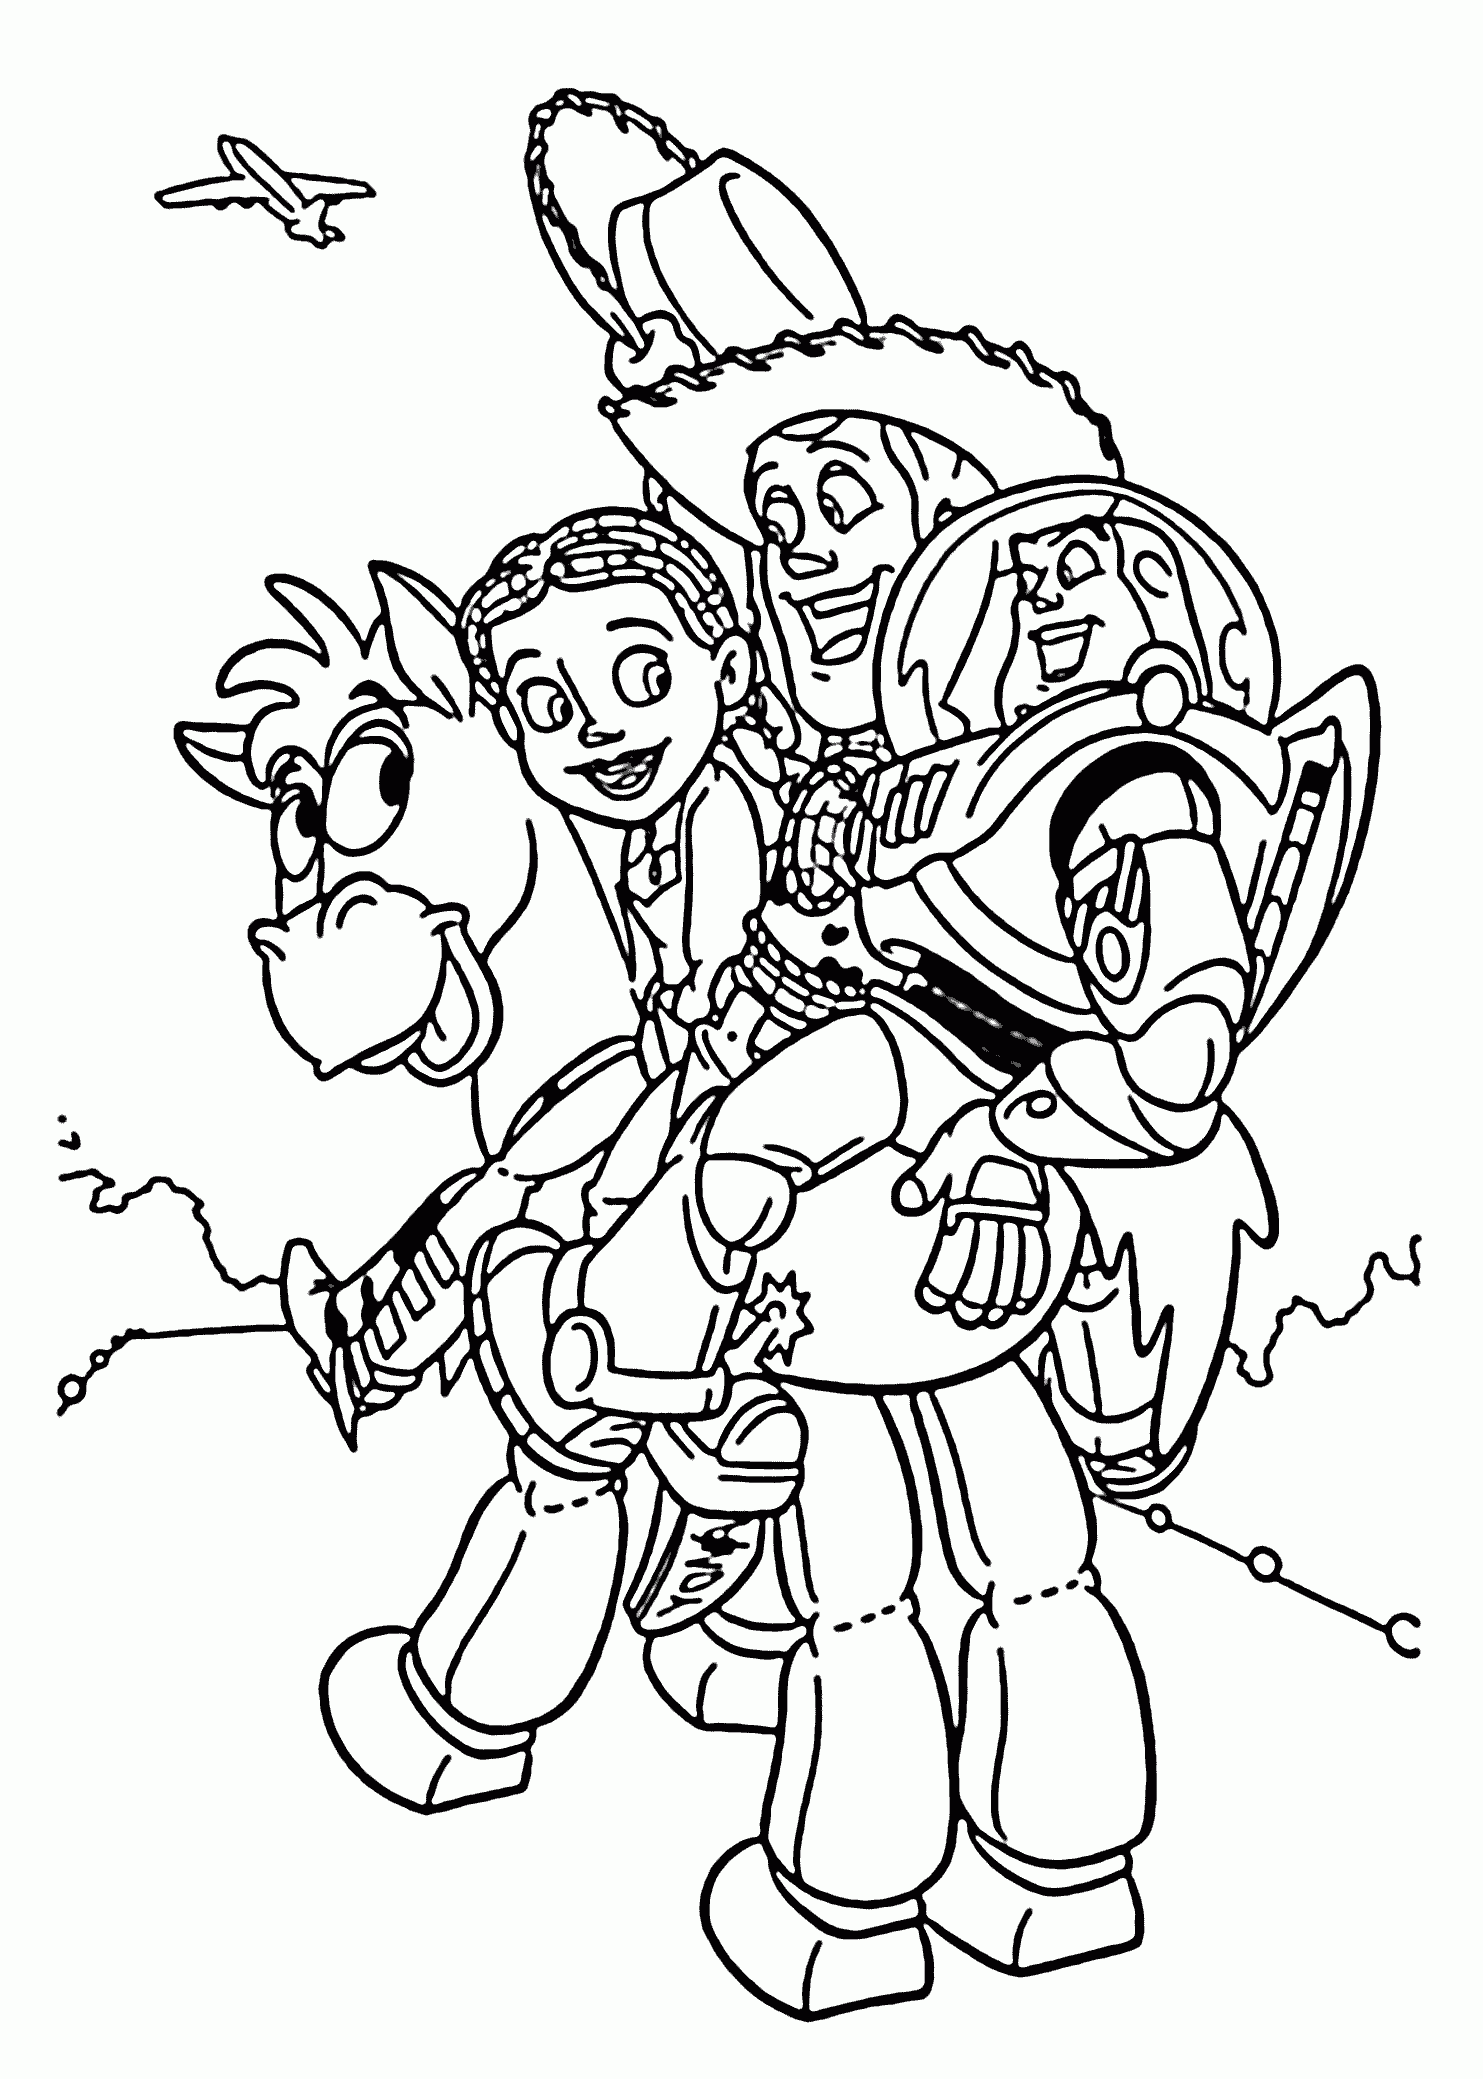 17+ Coloring Pages Disney Jessie for Adults - Free Printables – Faber-Castell USA